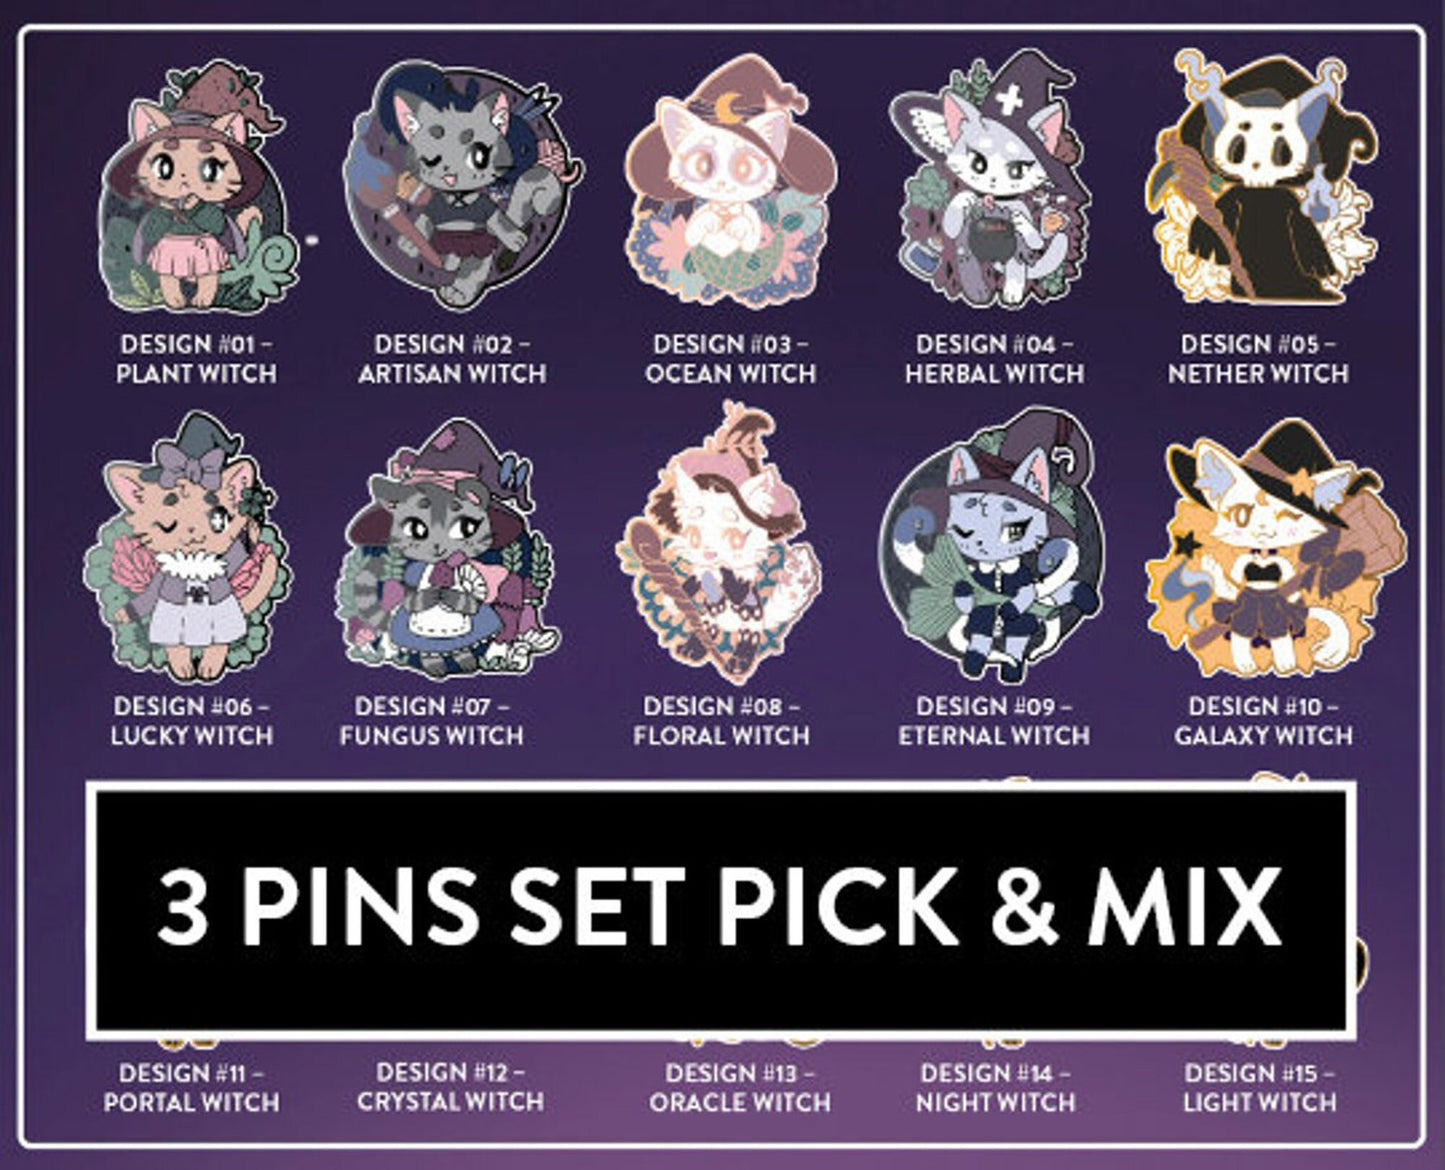 Myuna's Little Witch Acatemia Cat Witch Pins - Pick & Mix cute Cat Witch talismans pin bundles, Kawaii Witchy Occult Hard Enamel Pins